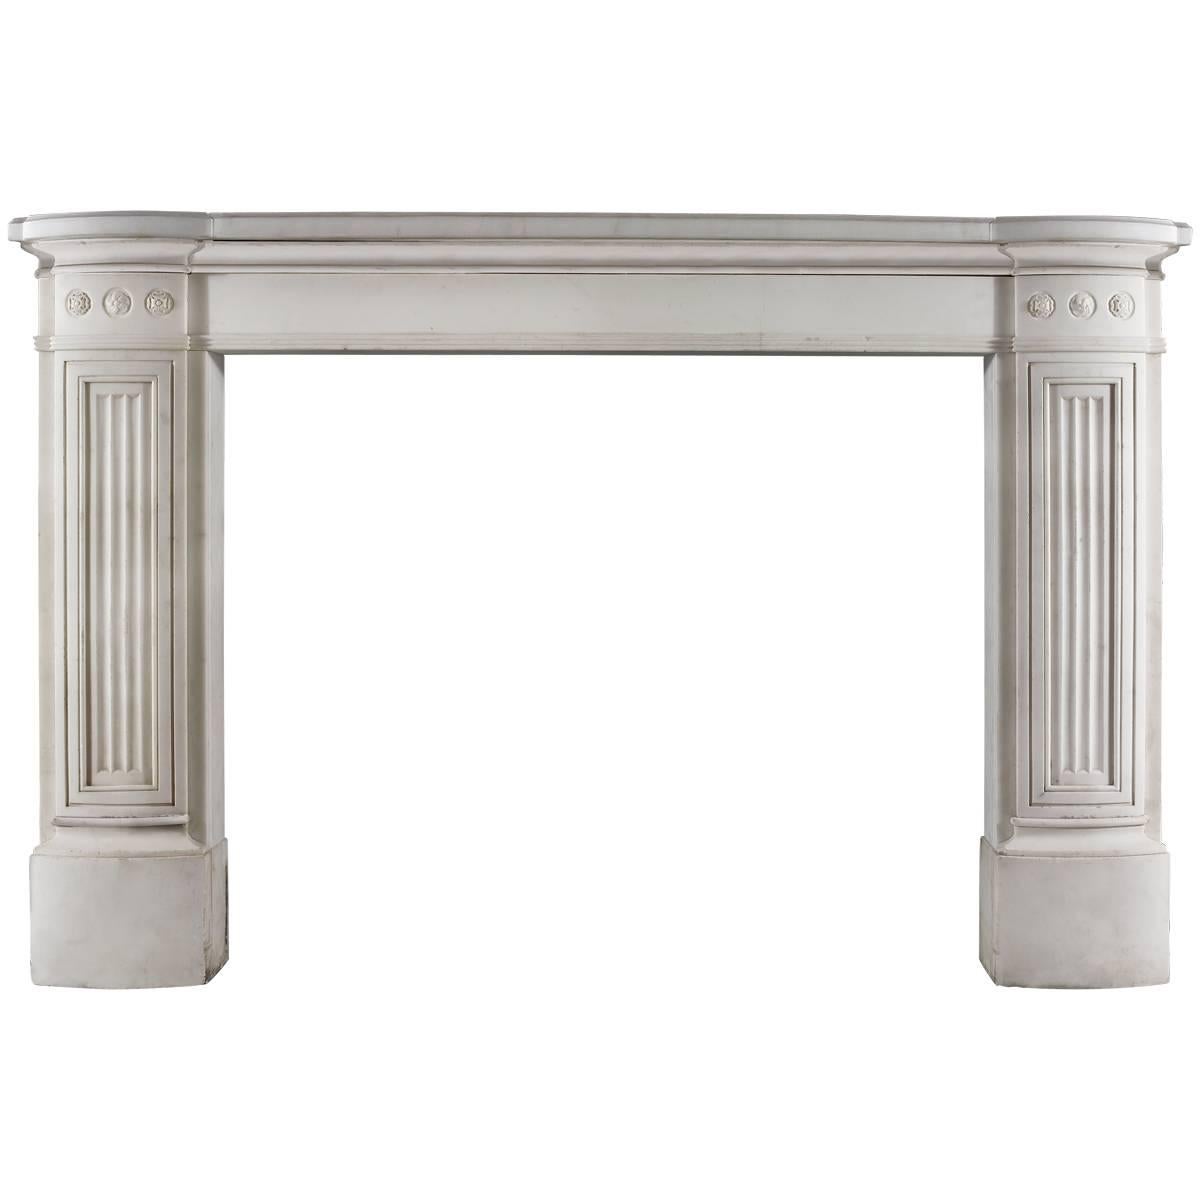 Antique English Regency Statuary Marble Fireplace Mantel For Sale